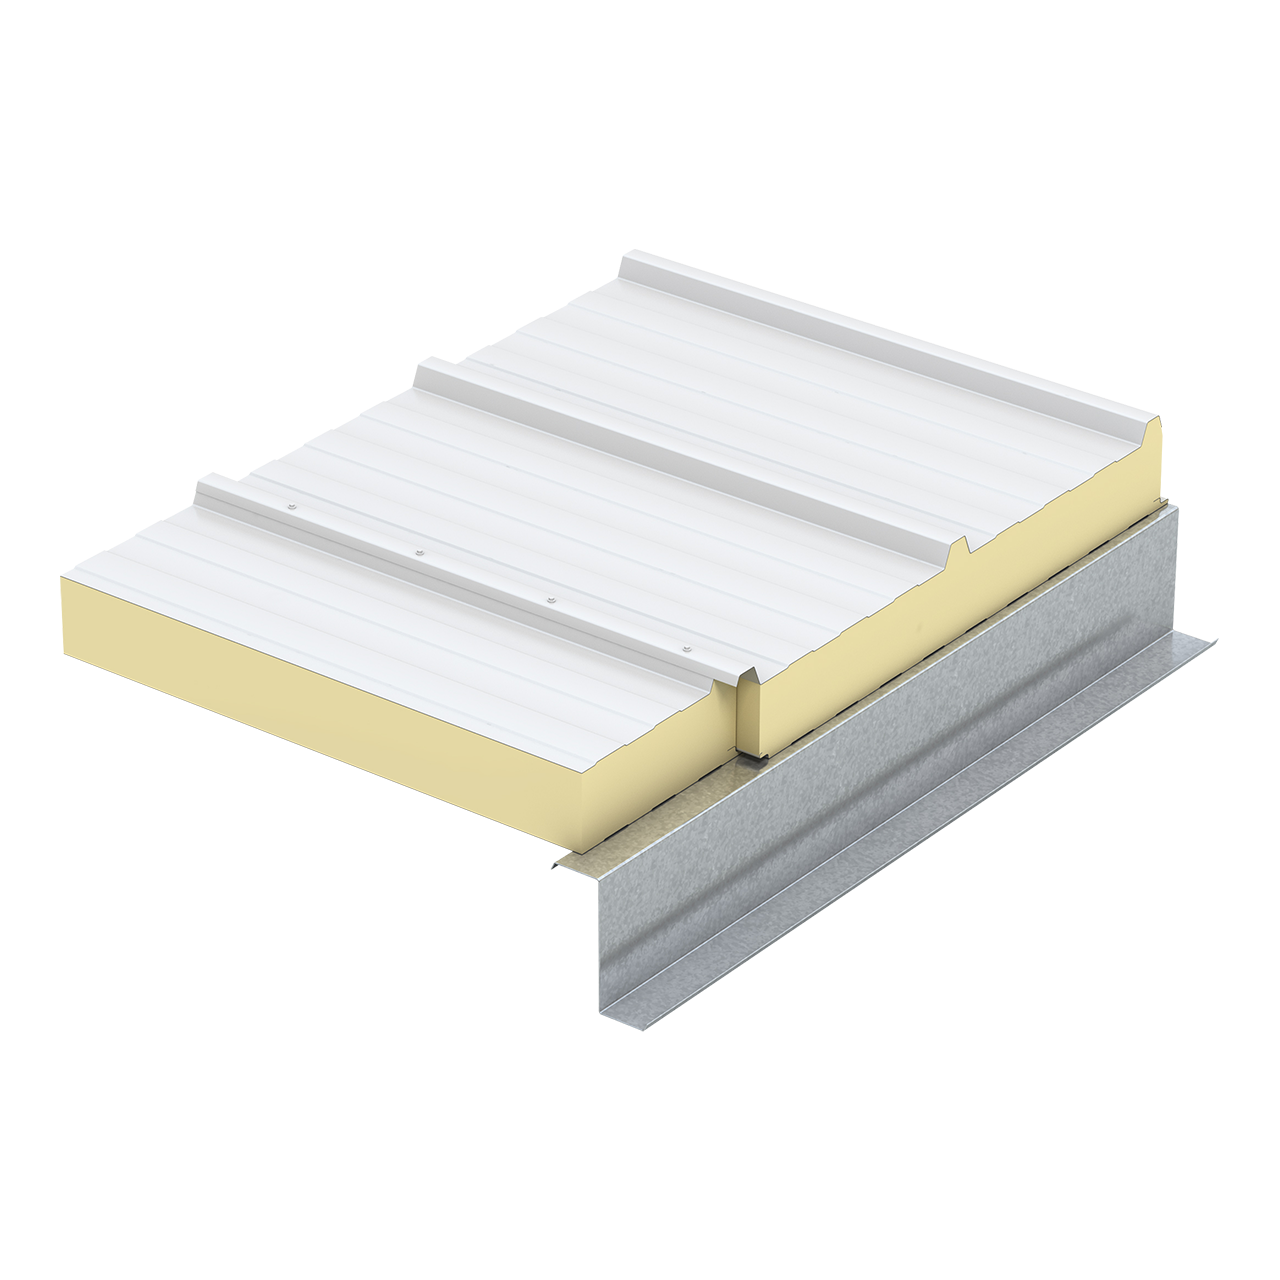 Find all Roof sandwich panels